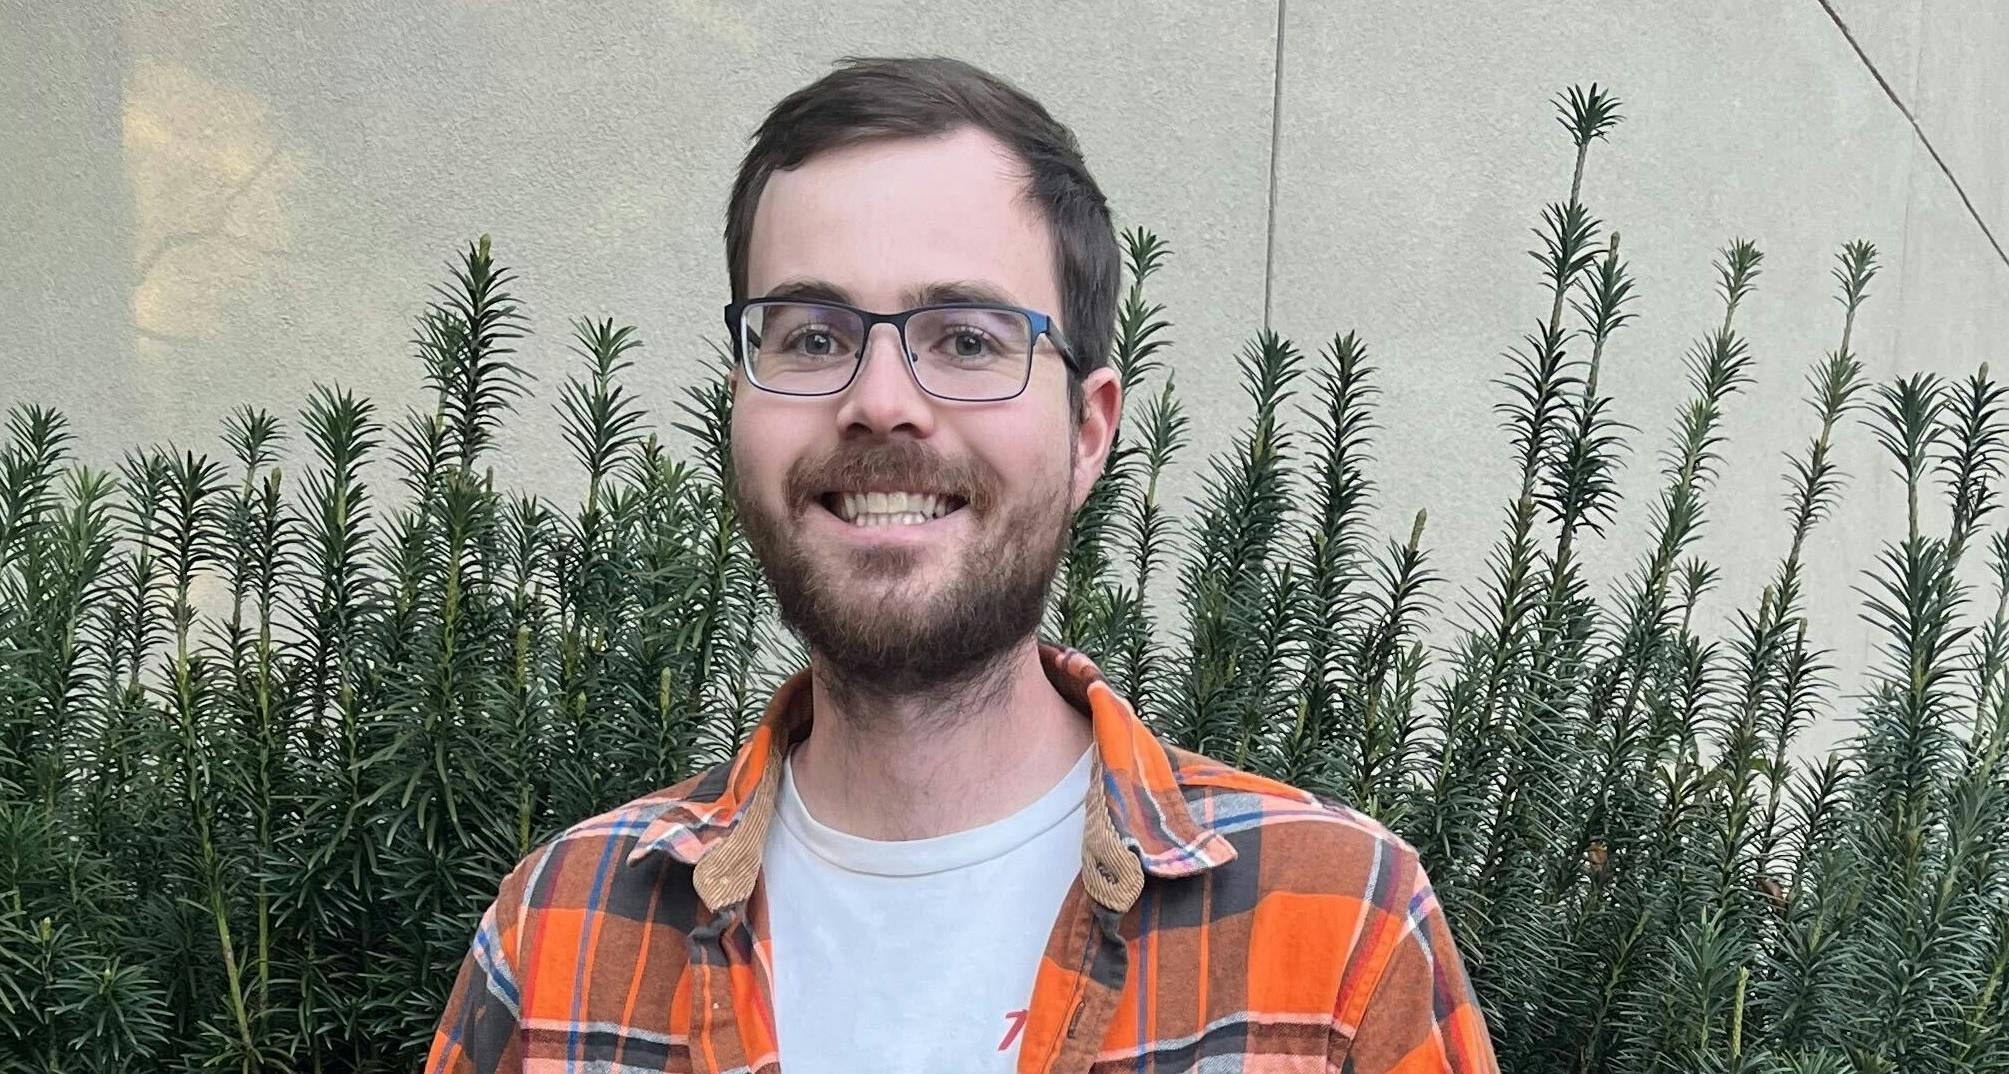 Photo of Matt with glasses, brown hair and a beard. He's wearing an orange plaid shirt over a white t-shirt and smiling. There is a plant behind him. 